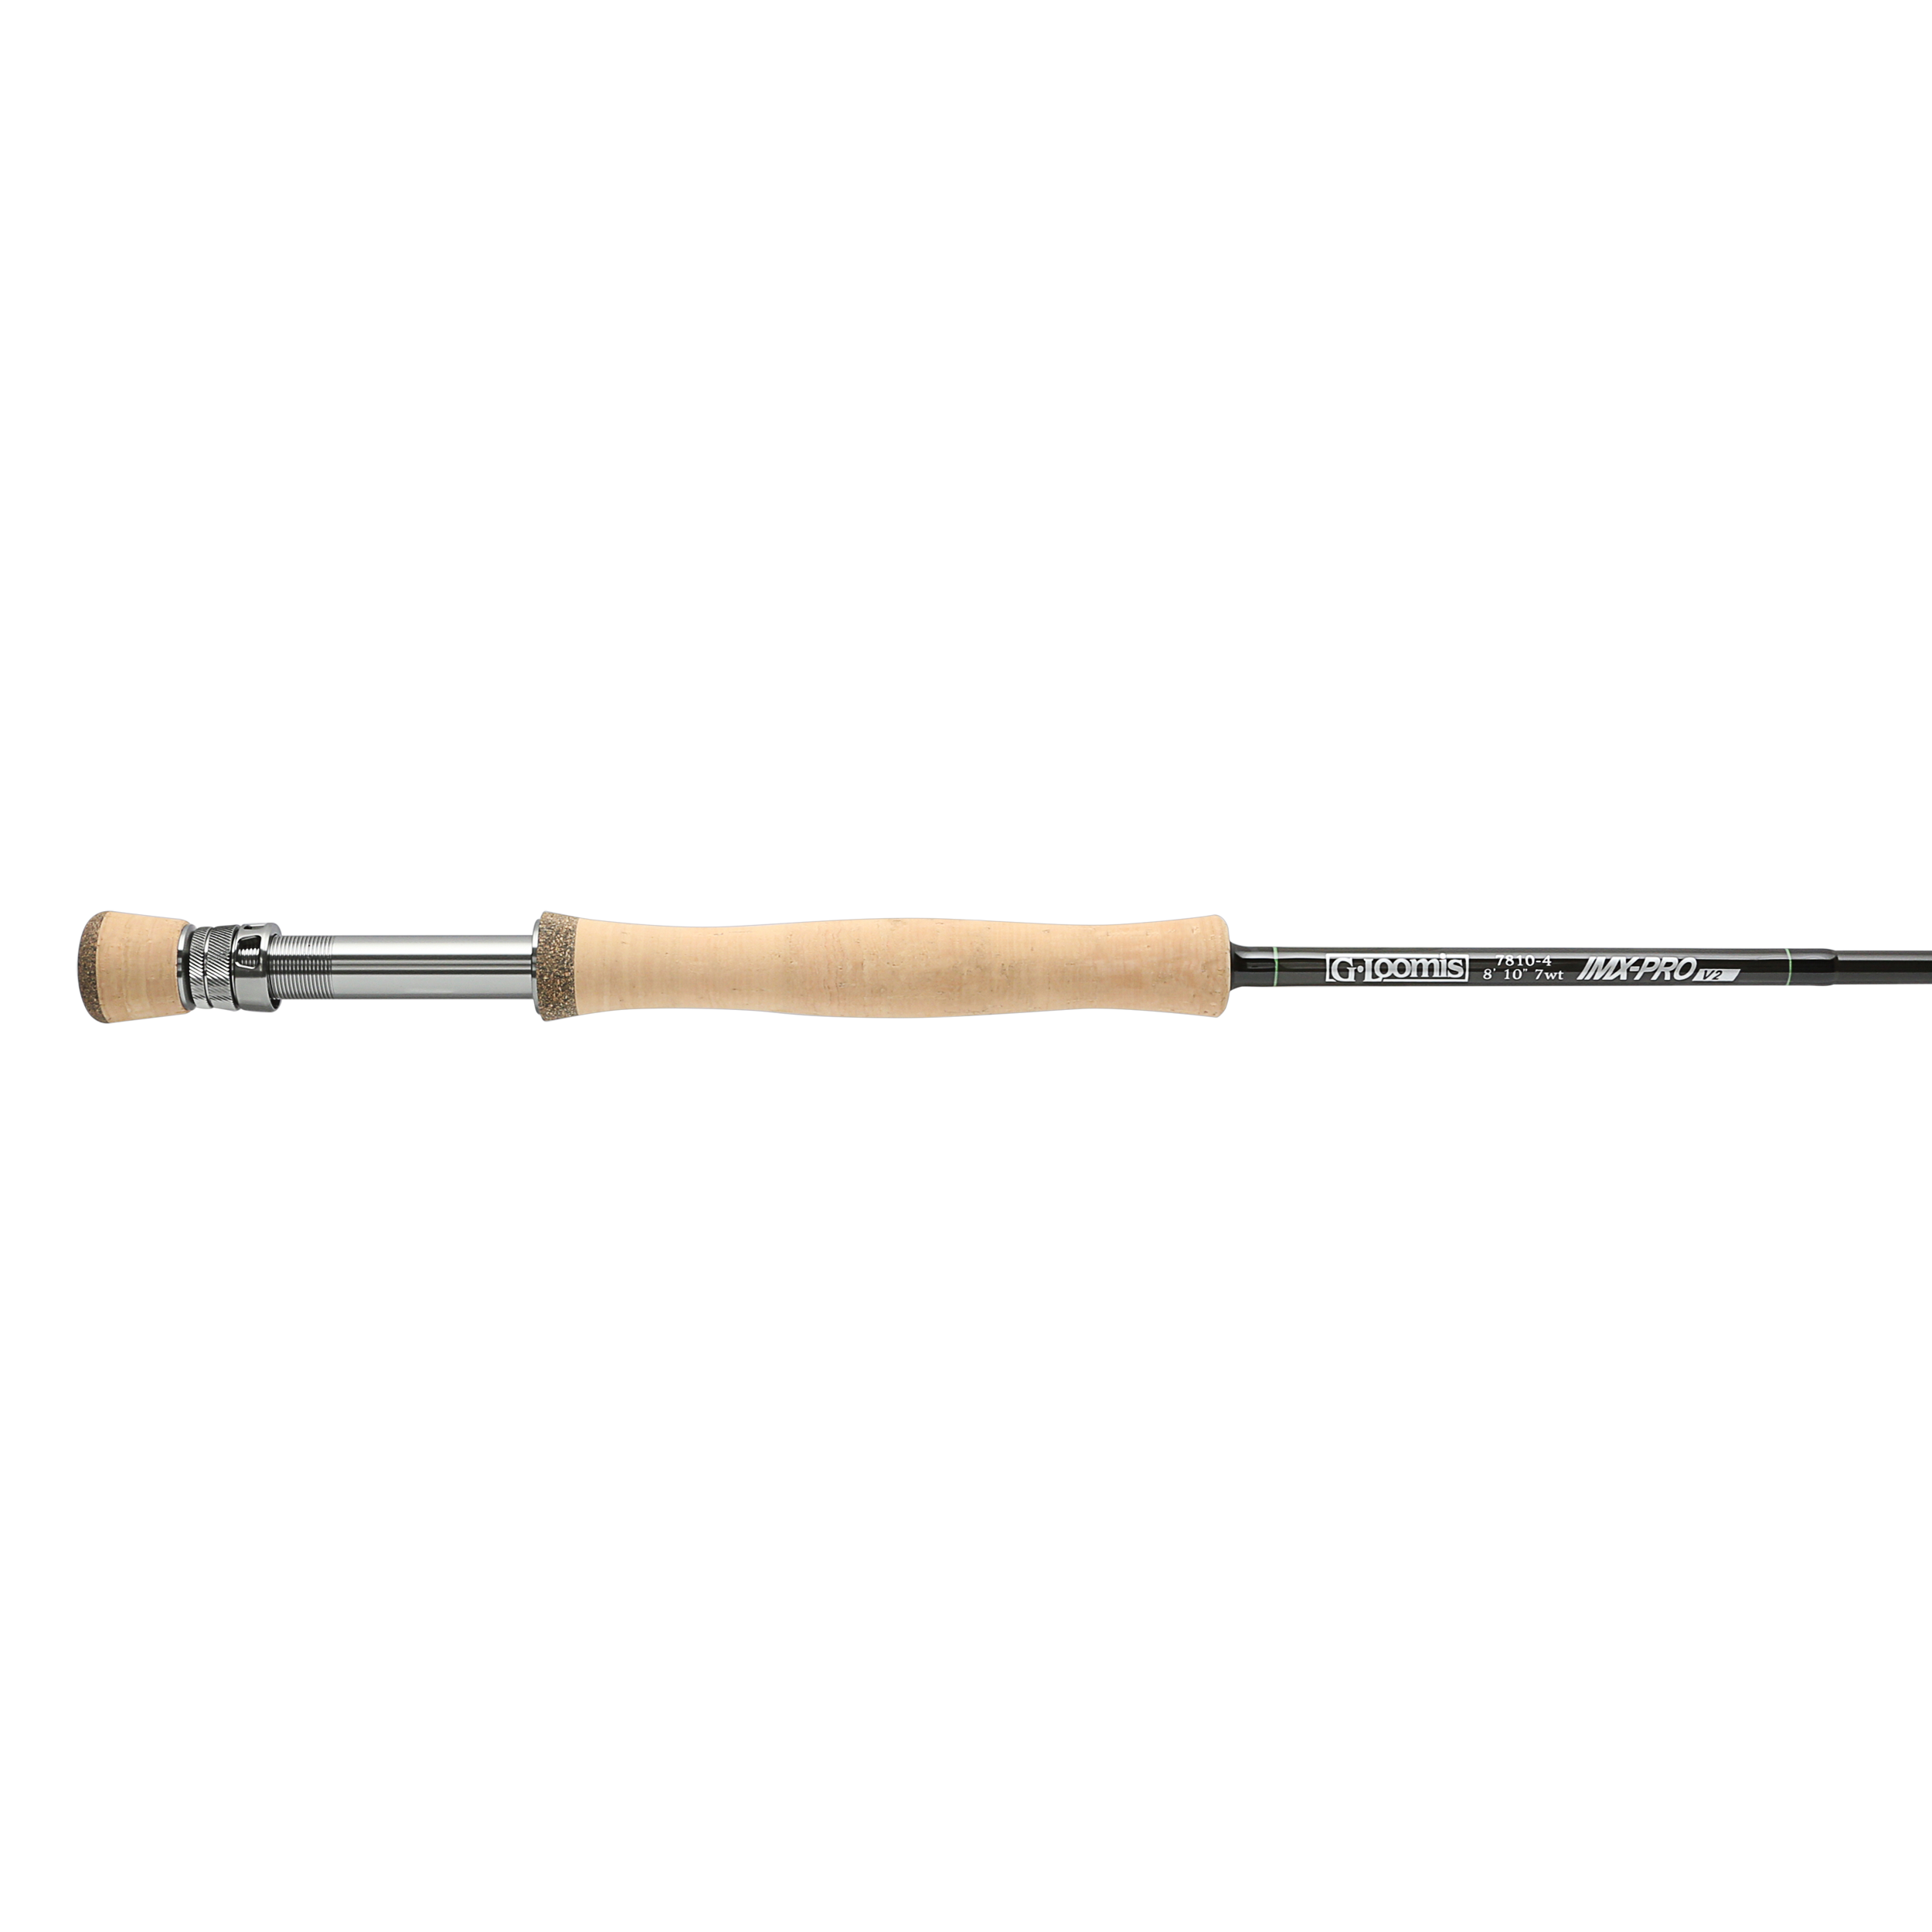 ECHO Compact Spey 12ft Fly Rod - AvidMax